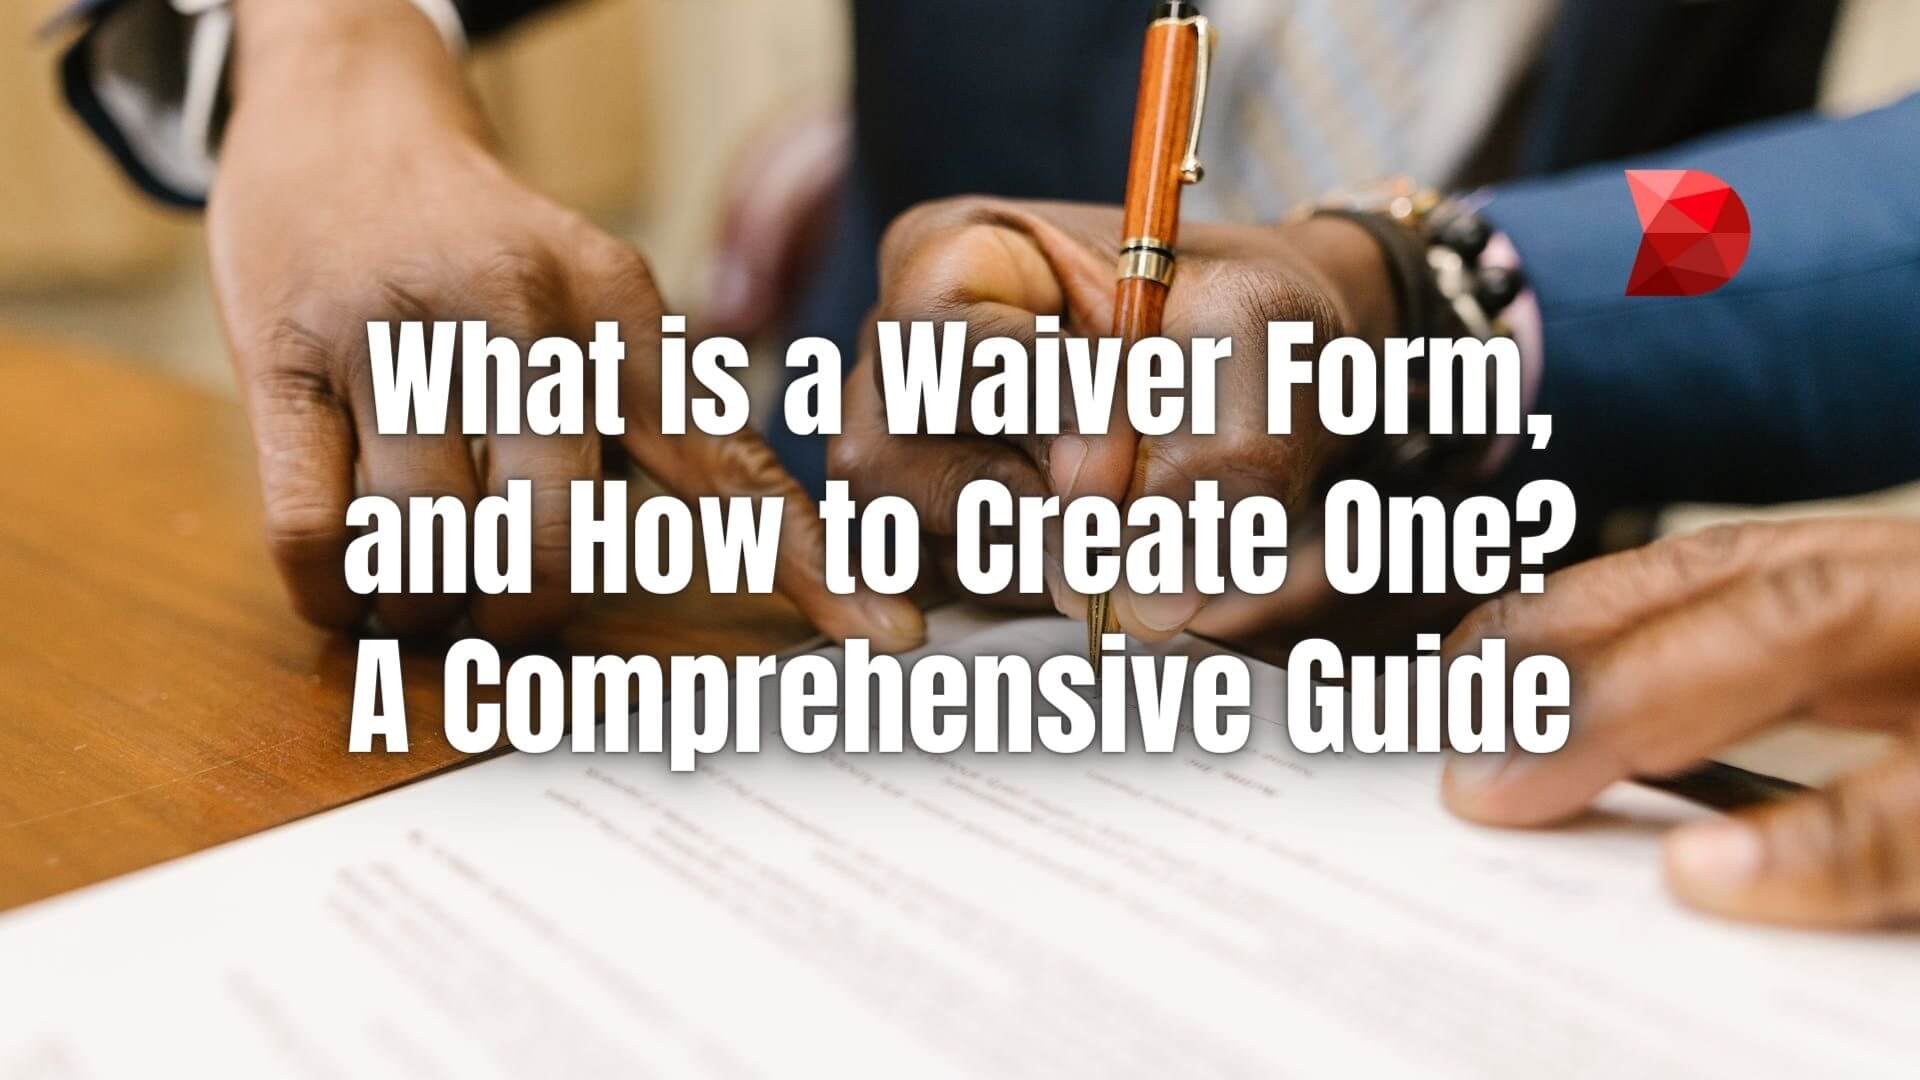 Unlock the essentials of crafting effective waiver forms in this comprehensive guide. Click here to learn creation tips and more!